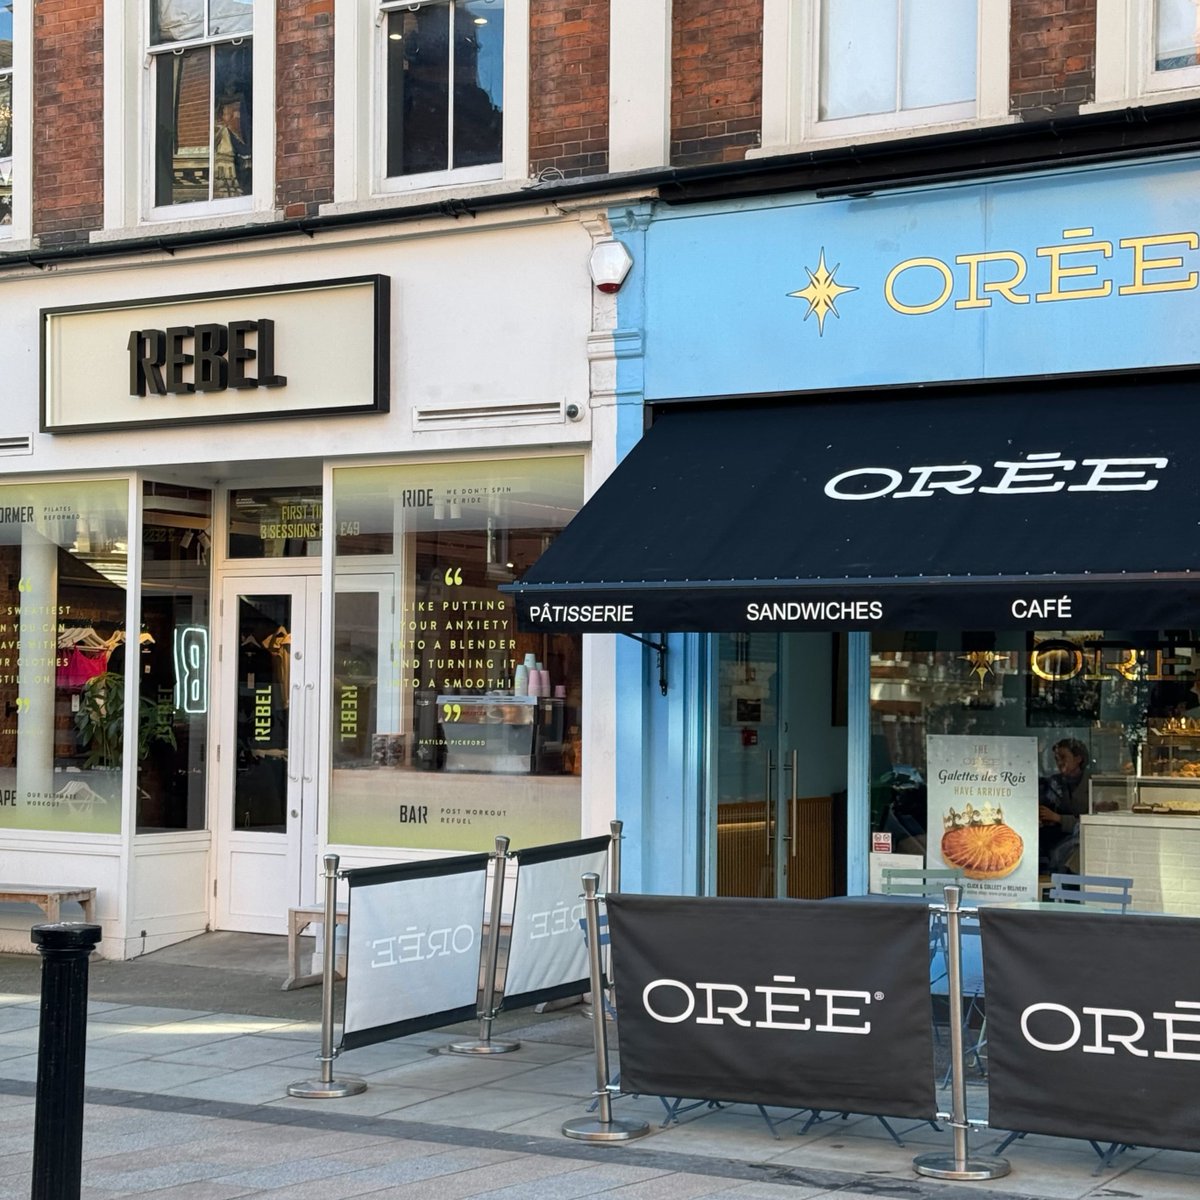 Head to St John's High Street to discover independent shops, boutiques and high street favourites. After your shopping spree, be sure to head to one of the local eateries to treat yourself to a coffee and something sweet! ☕️ 🍰